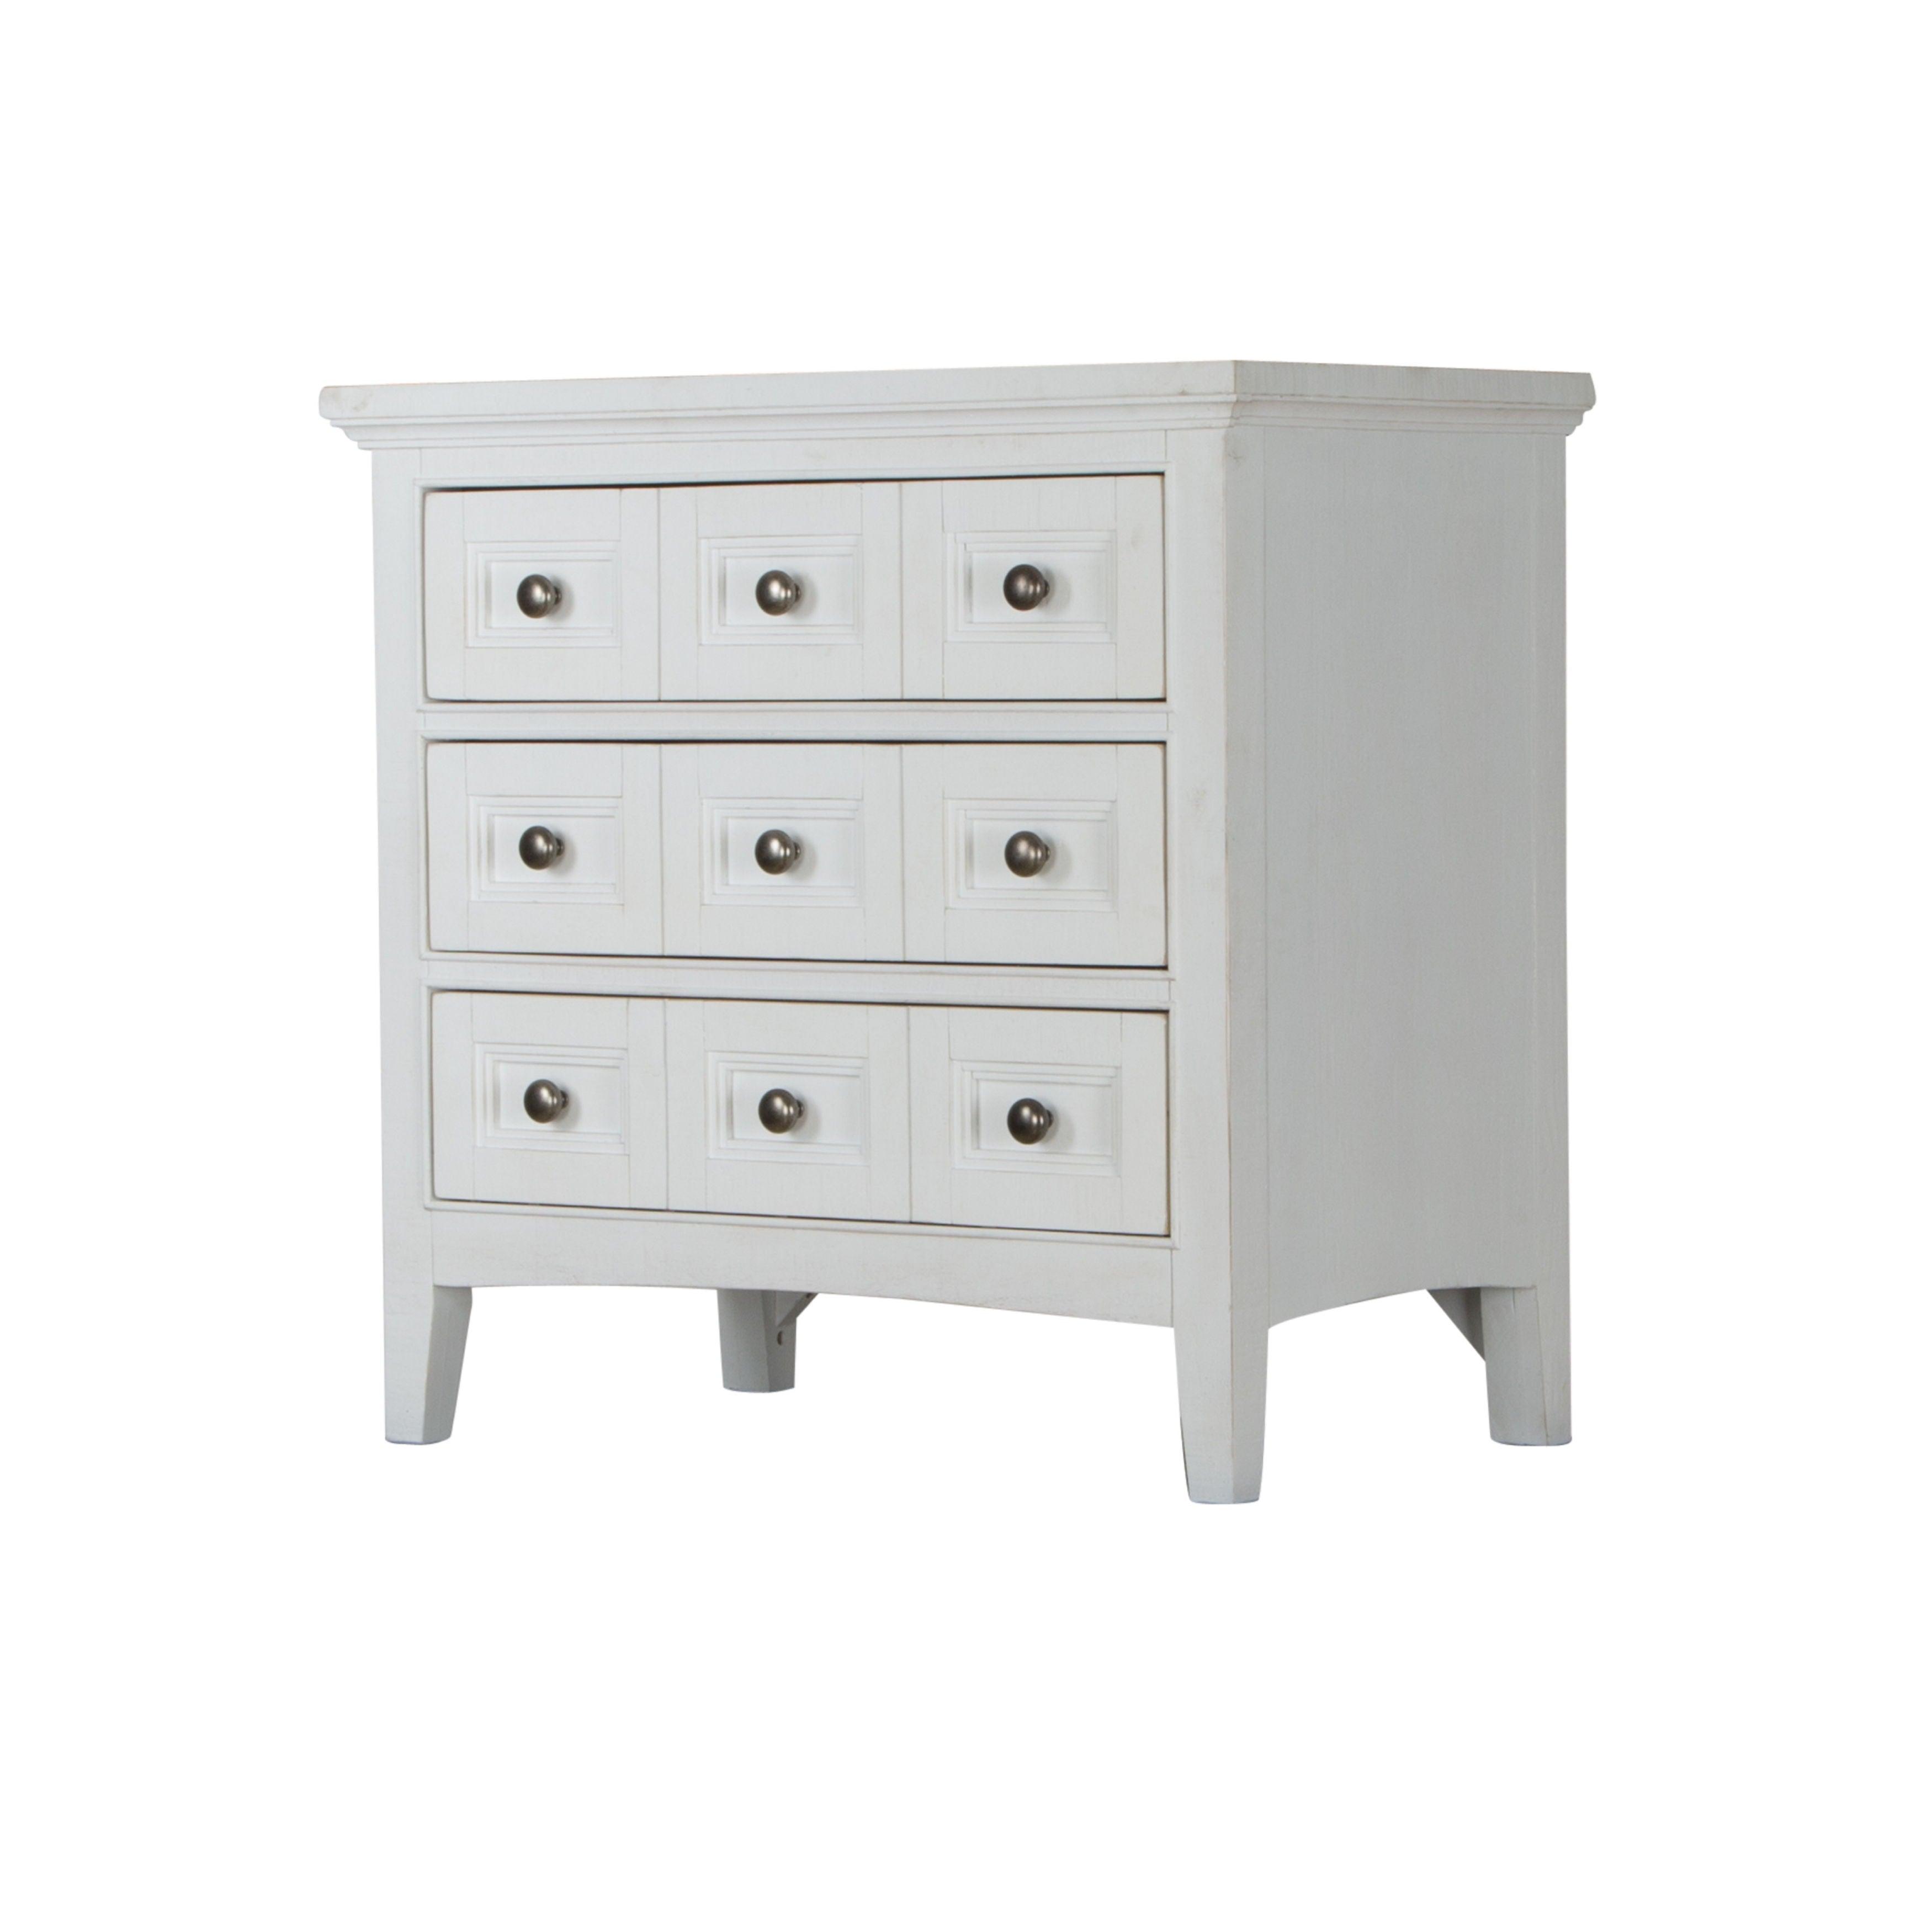 Magnussen Furniture - Heron Cove - Relaxed Traditional Chalk White Three Drawer Nightstand - Chalk White - 5th Avenue Furniture